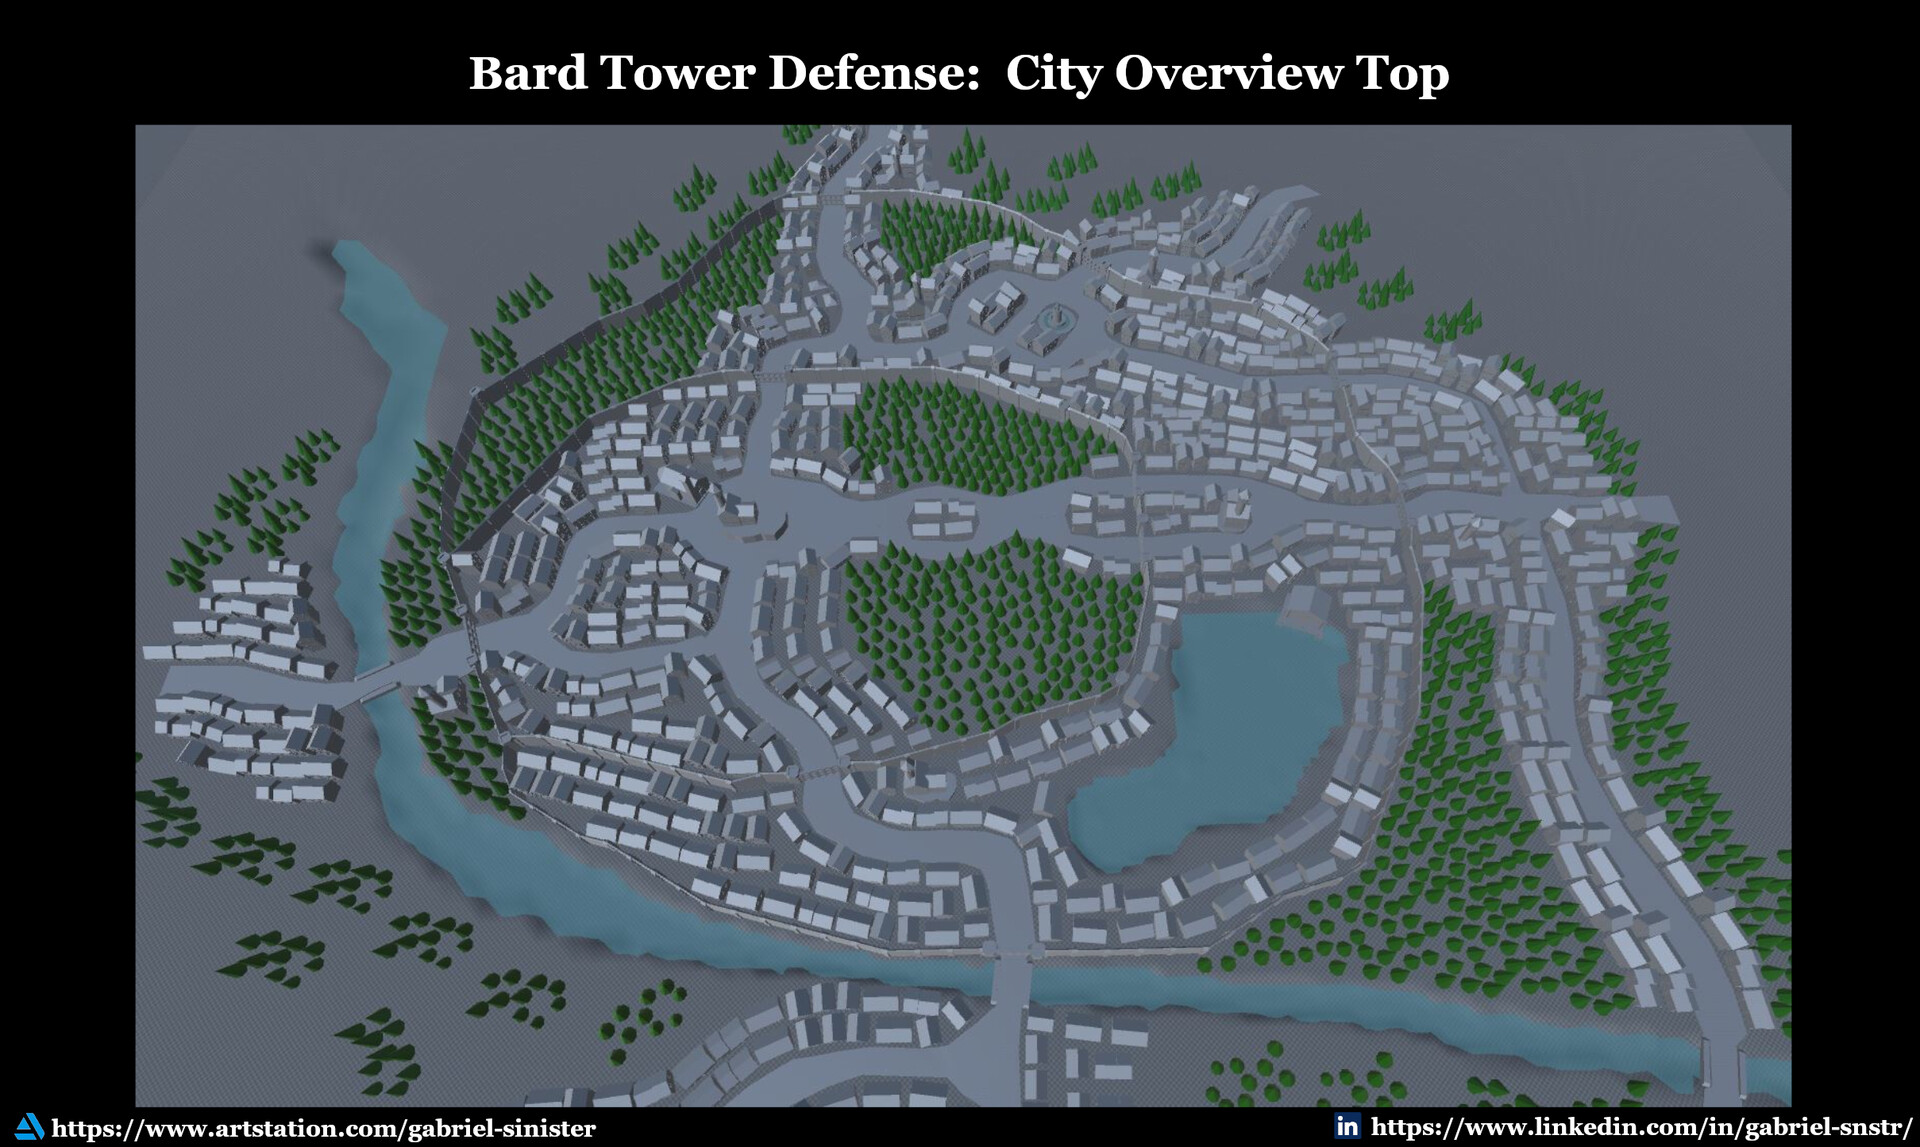 Towers, The Bard